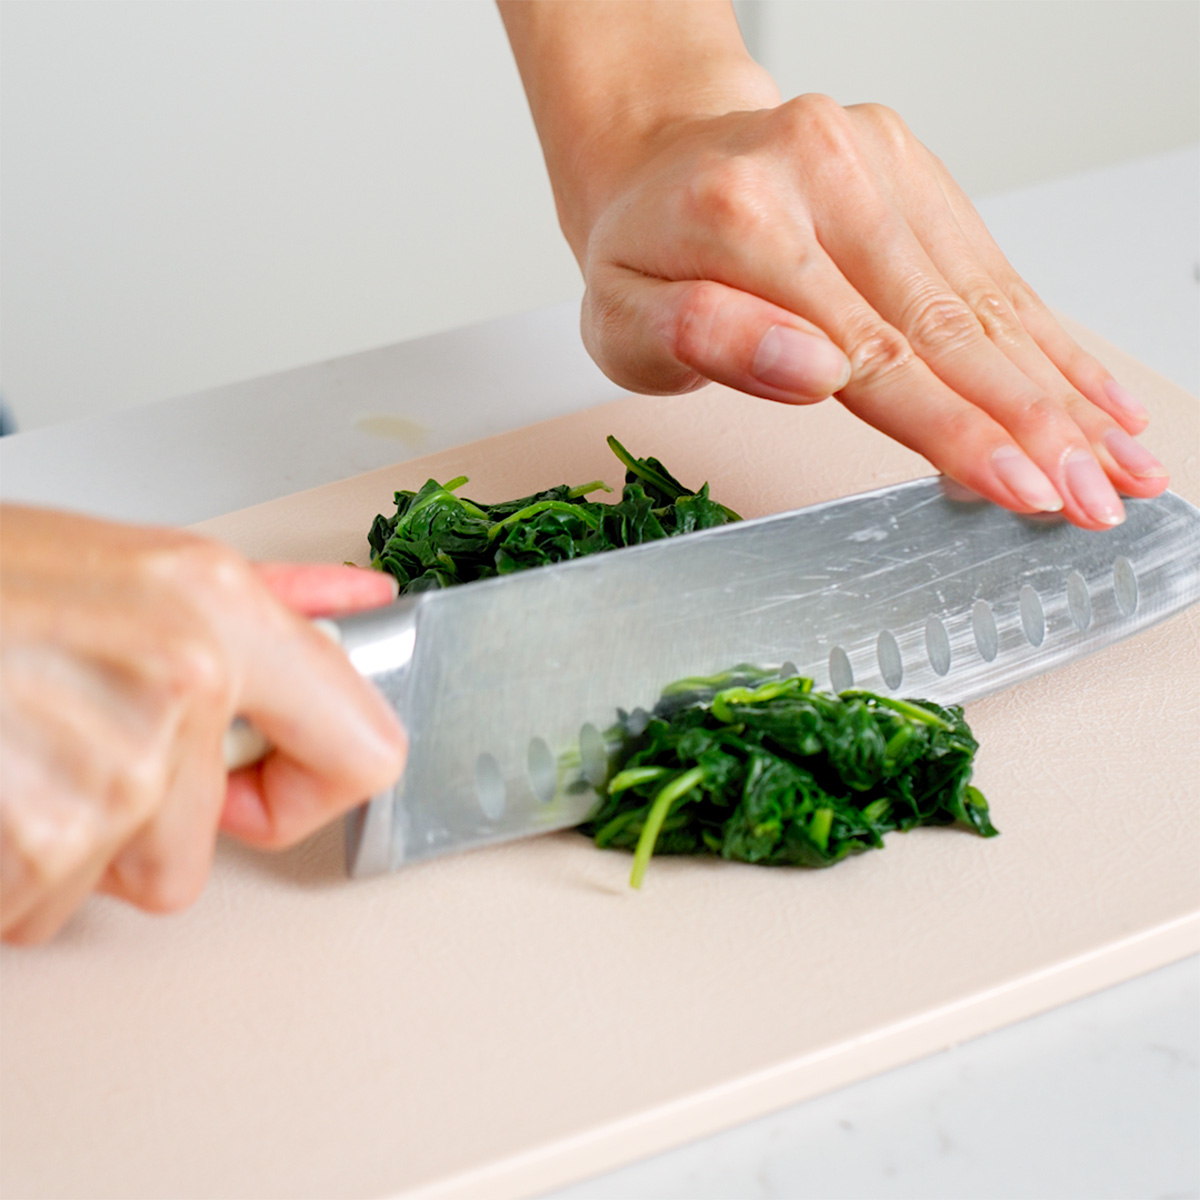 Chopping blanched spinach on a cutting board.